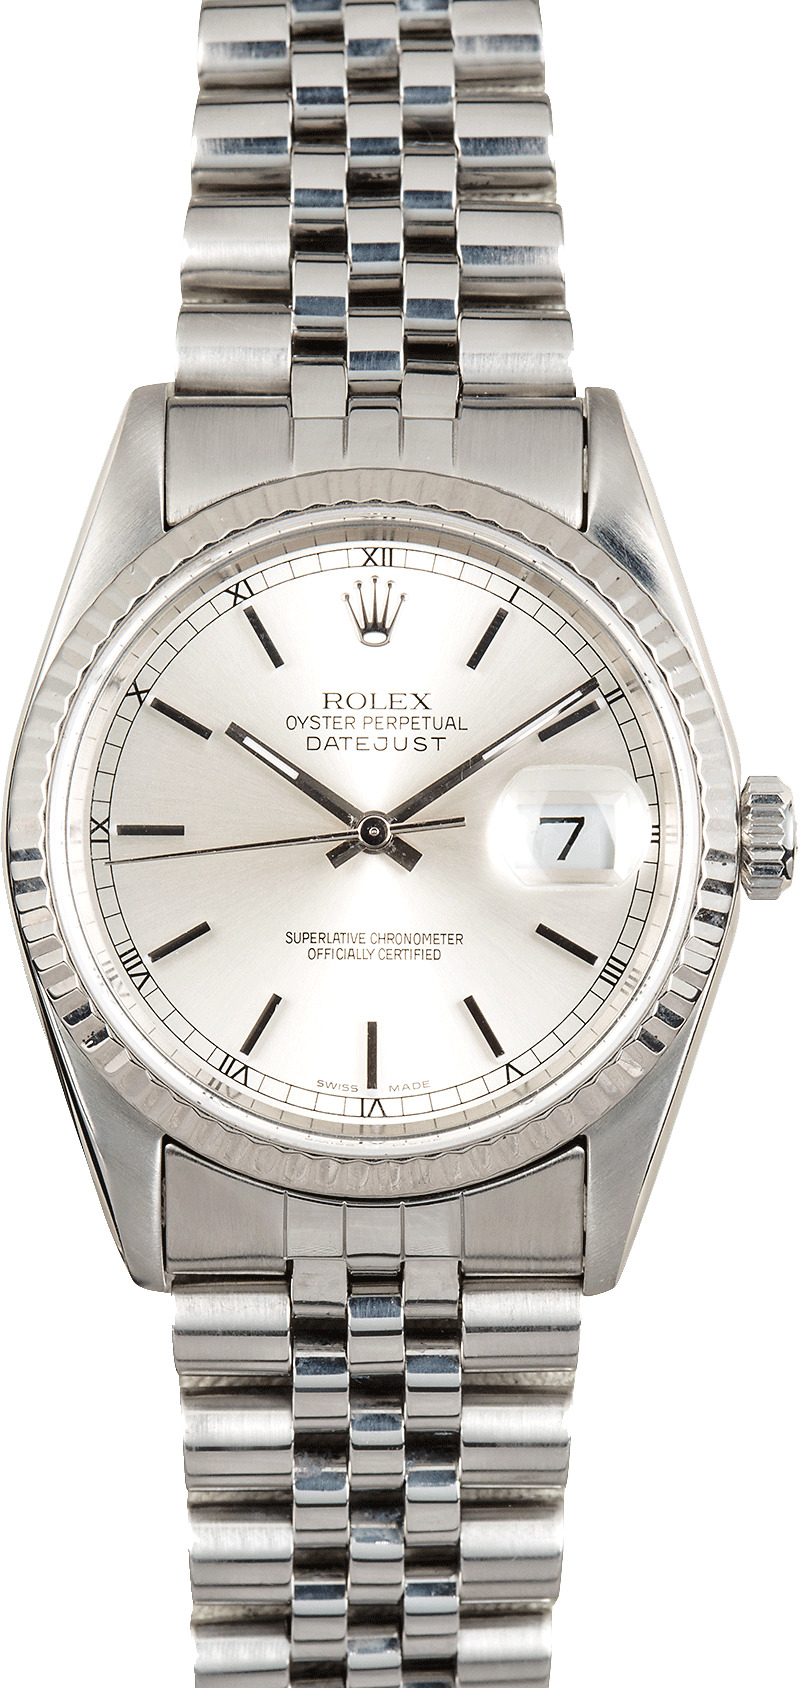 rolex oyster perpetual datejust white gold bezel